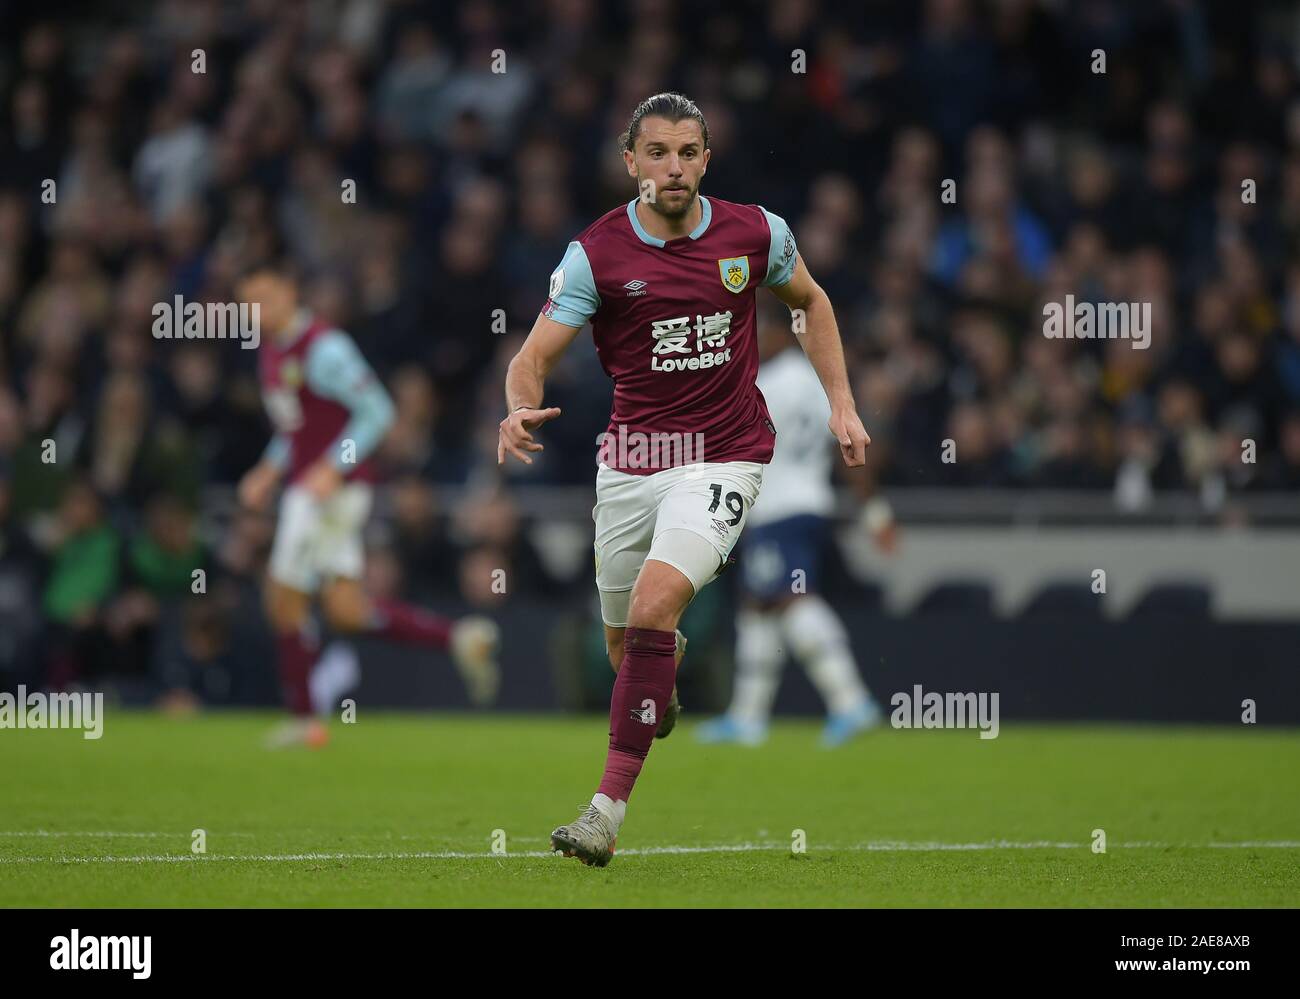 London, UK. 7th December 2019. Jay Rodriguez of Burnley during the Tottenham Hotspur vs Burnley Premier League Football match at the Tottenham Hotspur Stadium on 7th December 2019-EDITORIAL USE ONLY No use with unauthorised audio, video, data, fixture lists (outside the EU), club/league logos or 'live' services. Online in-match use limited to 45 images (+15 in extra time). No use to emulate moving images. No use in betting, games or single club/league/player publications/services- Credit: Martin Dalton/Alamy Live News Stock Photo